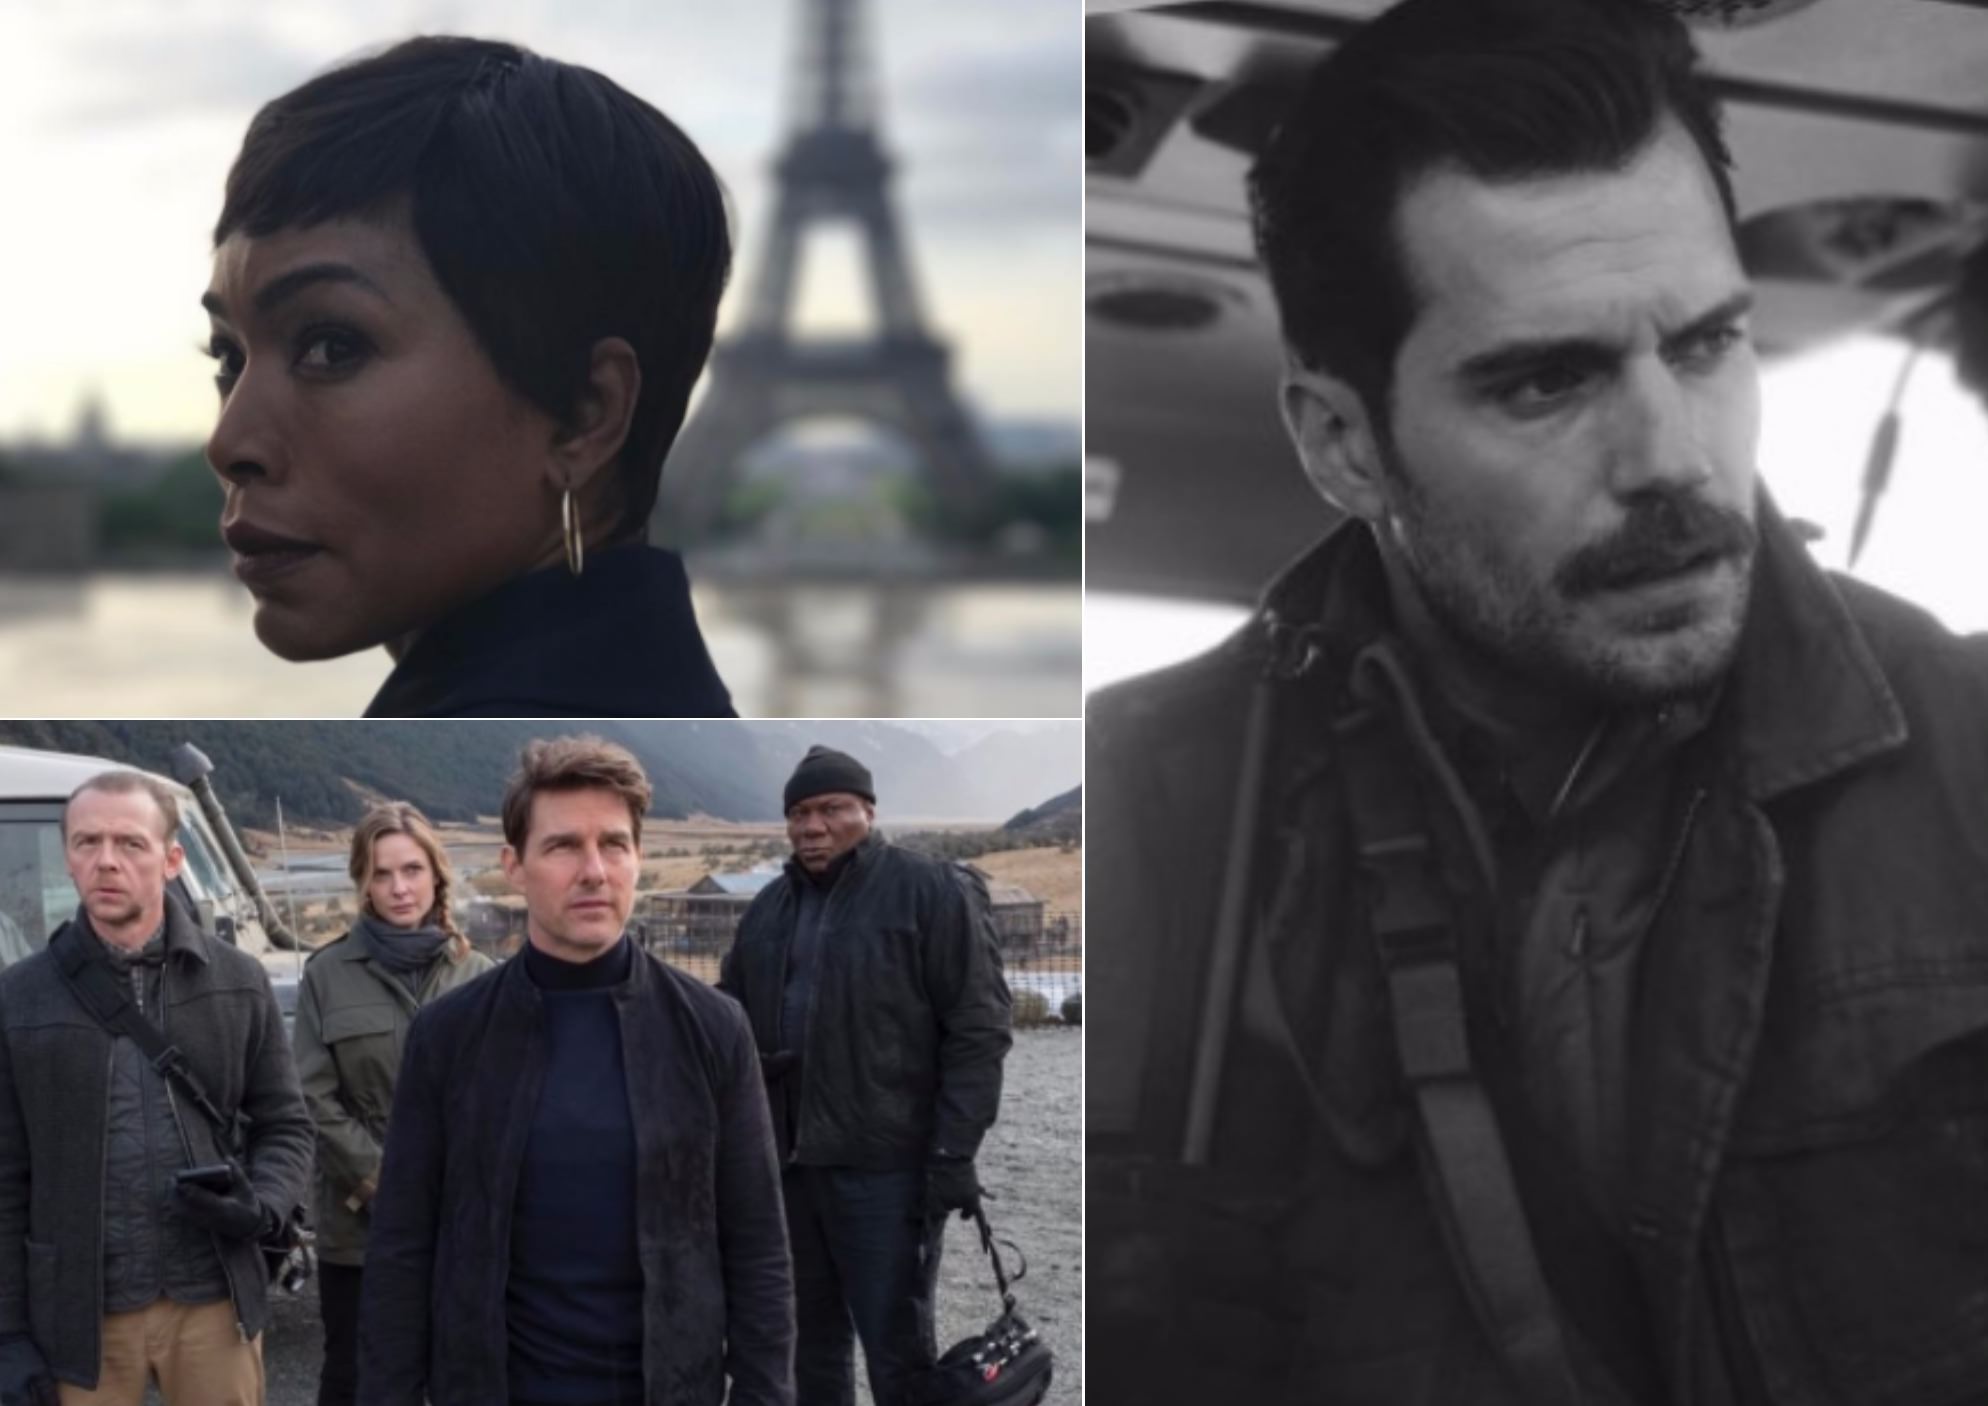 Here are the First Images From Mission: Impossible 6 - The Credits